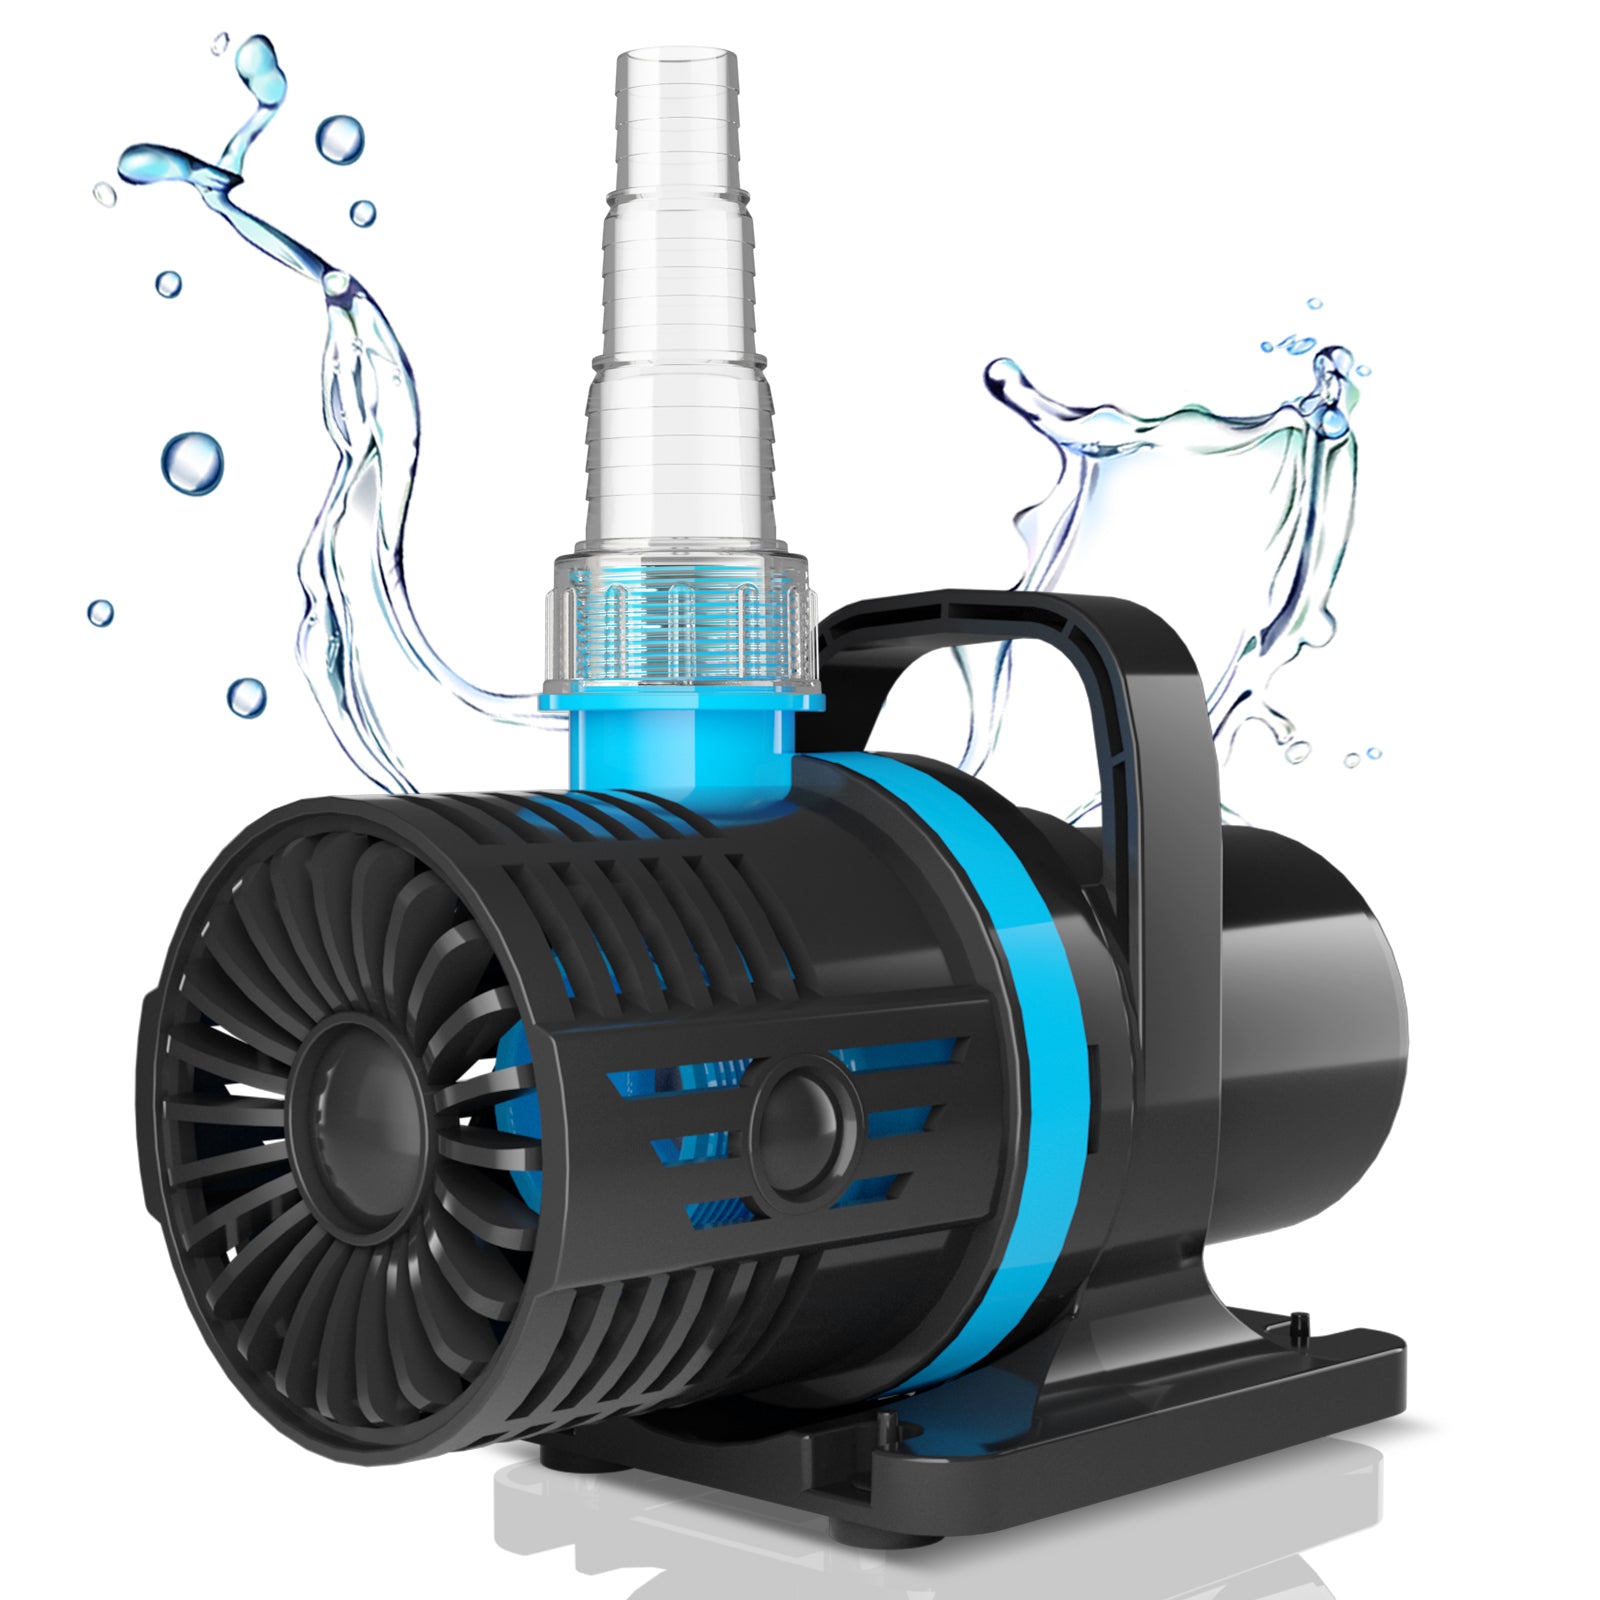 Submersible Water Pump, Pond Pump with filter, 3380GPH Ultra-quiet Fountain Pump with 16ft Cable, for Pool, Garden, Backyard, Waterfalls, and Water Circulation with 3 hoses and 1 filter bag